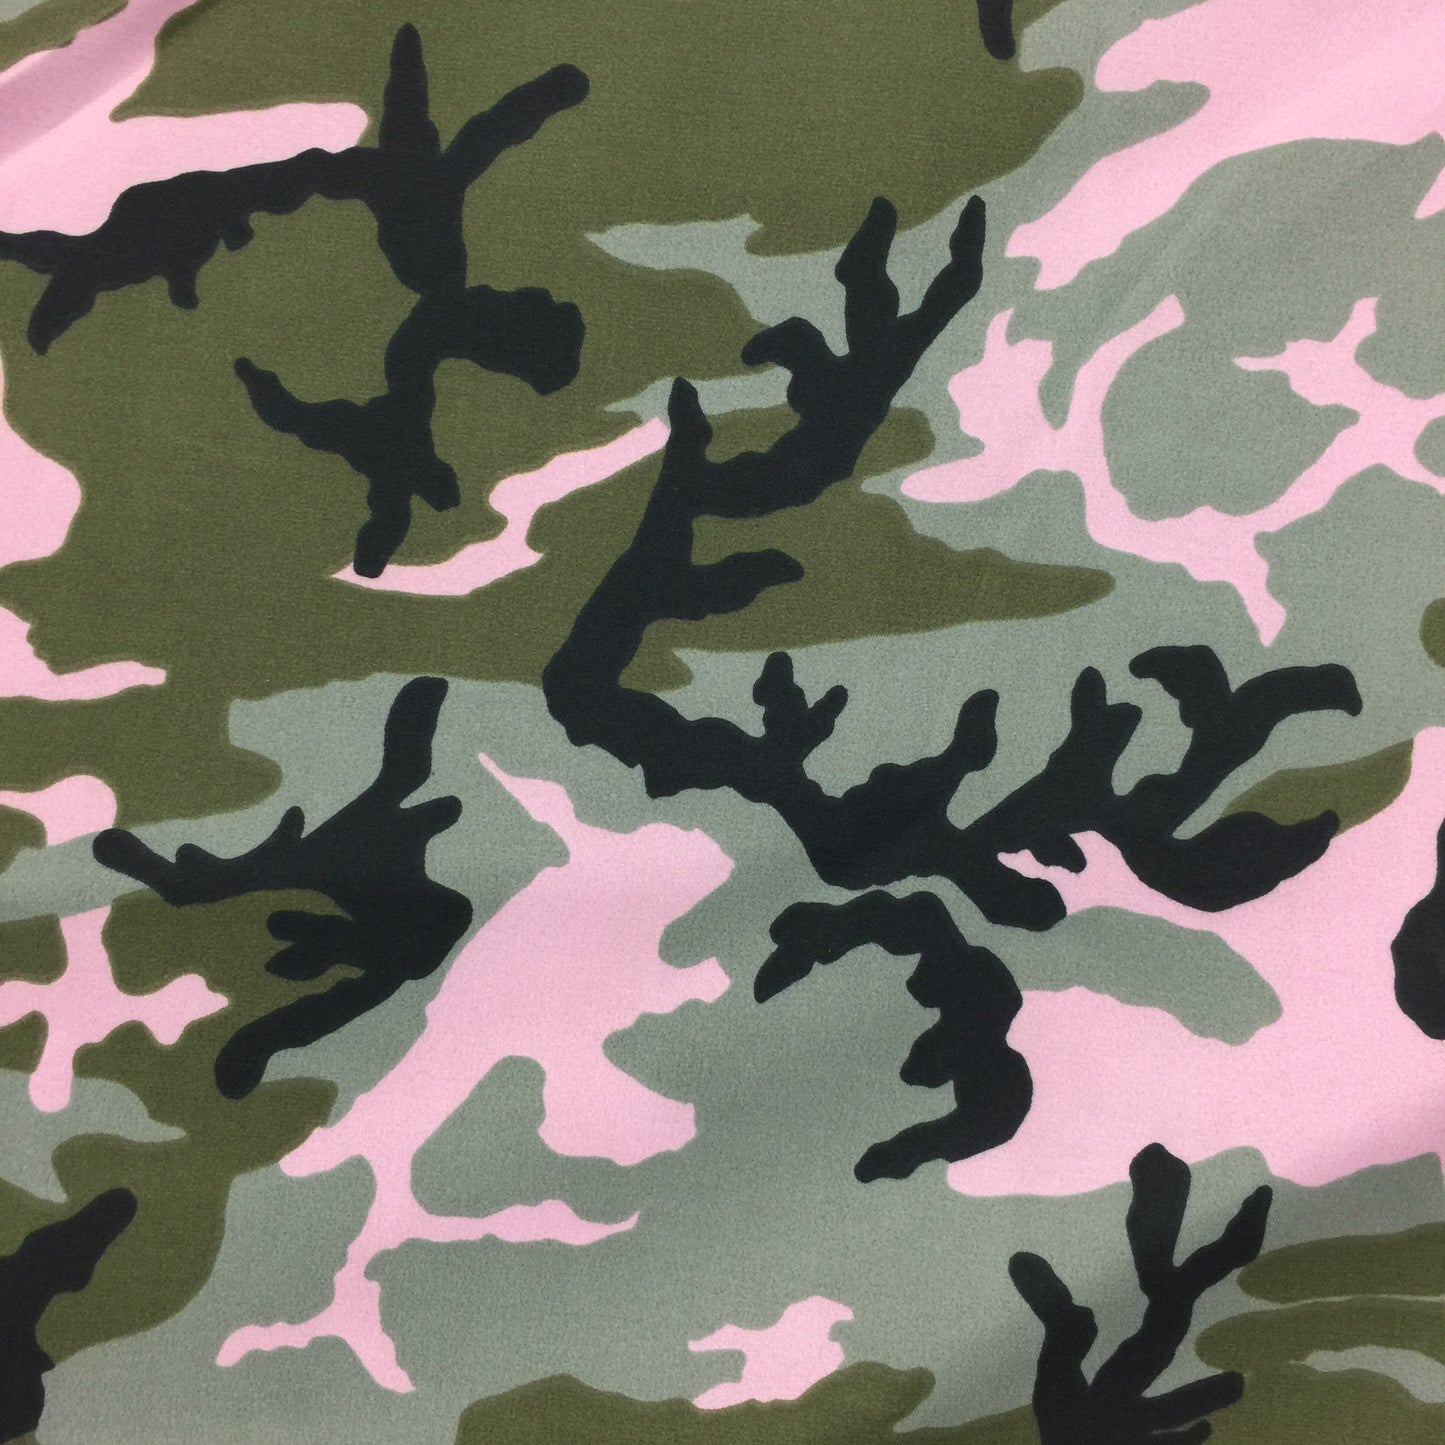 Water repellent, sanded microfiber Polyester Fabric - Pink Woodland Camo (Sold per Yard)